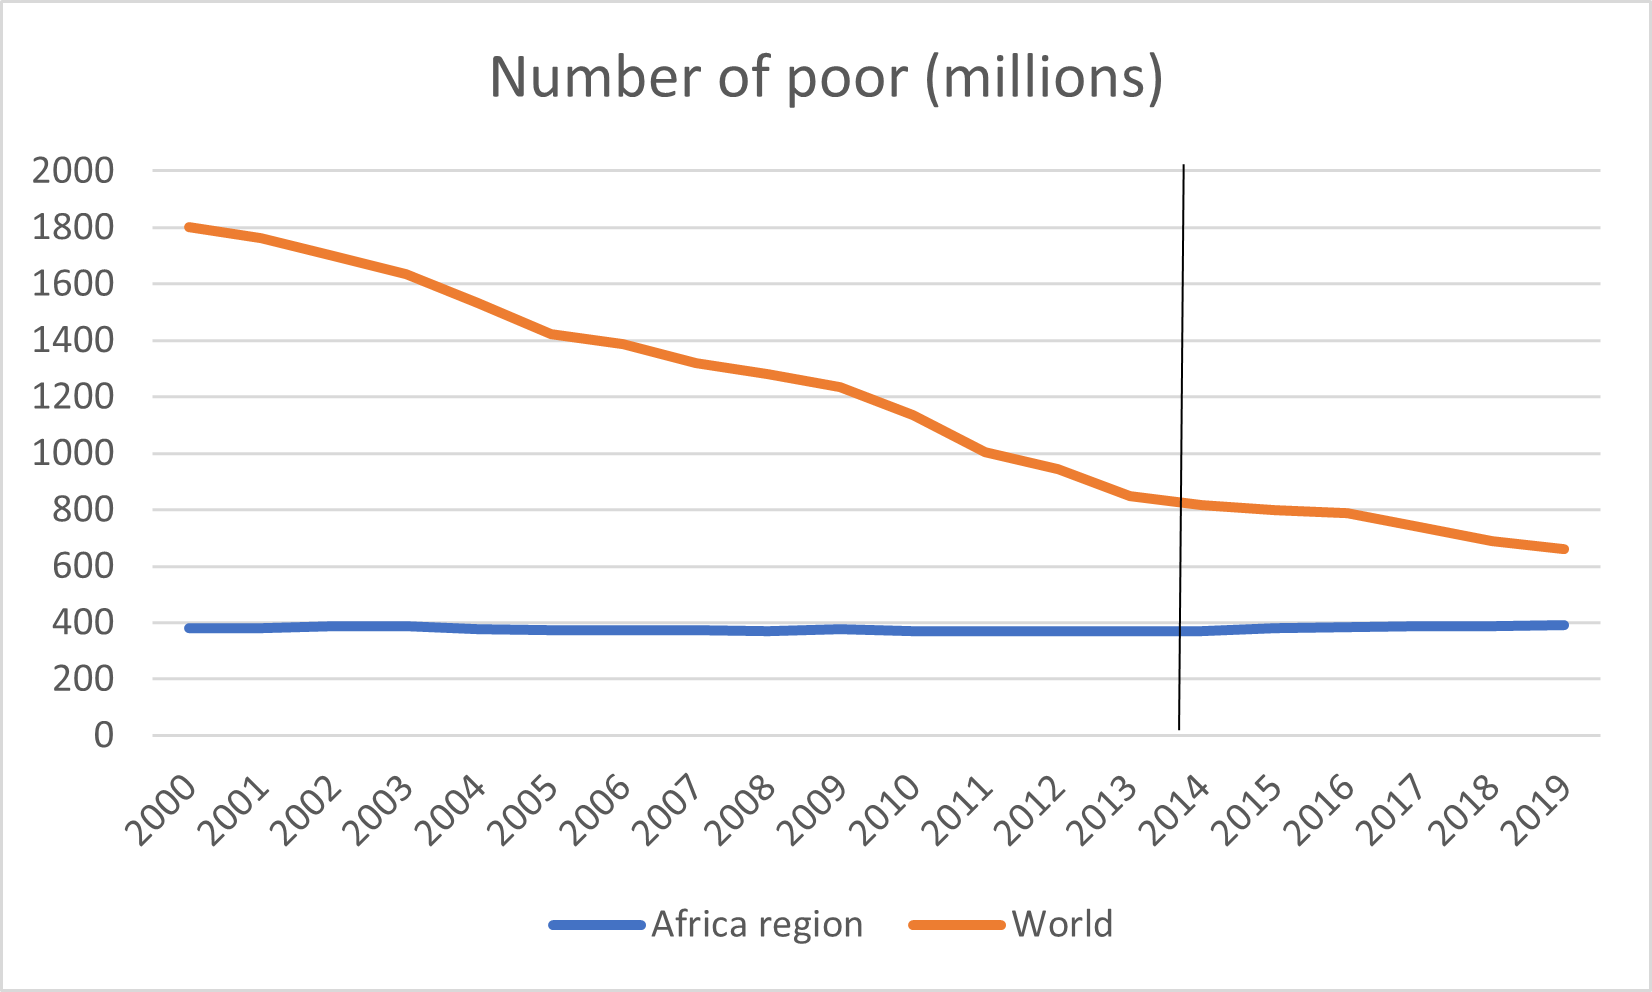 Chart showing number of poor people in millions, in Africa and the world.